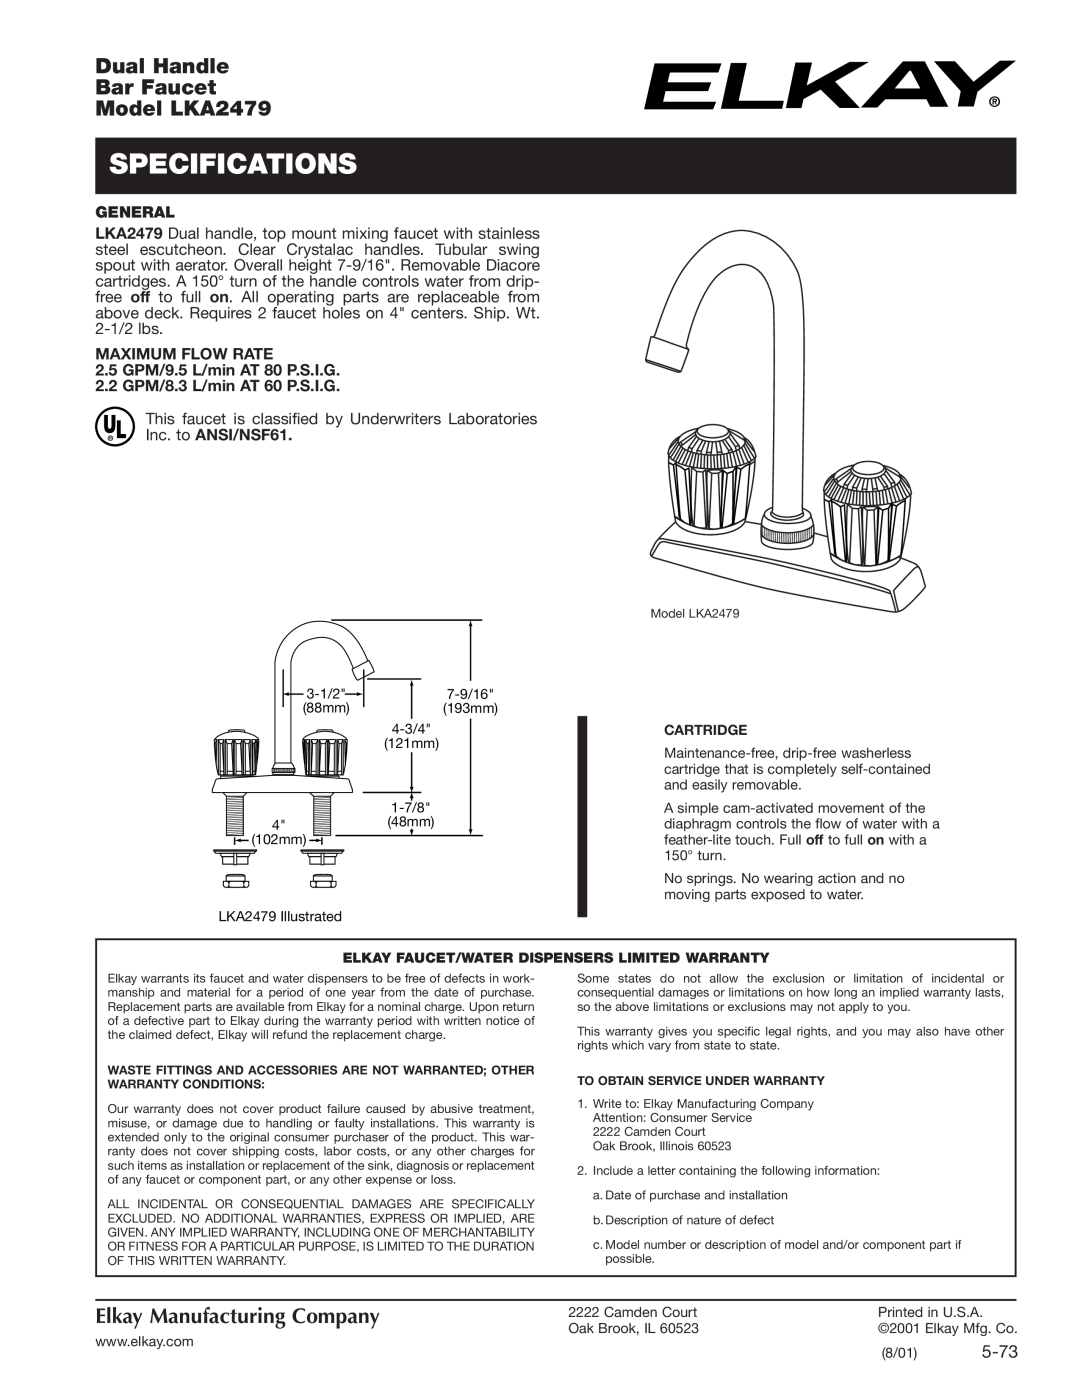 Elkay specifications Specifications, Dual Handle Bar Faucet Model LKA2479, Elkay Manufacturing Company, General, 5-73 